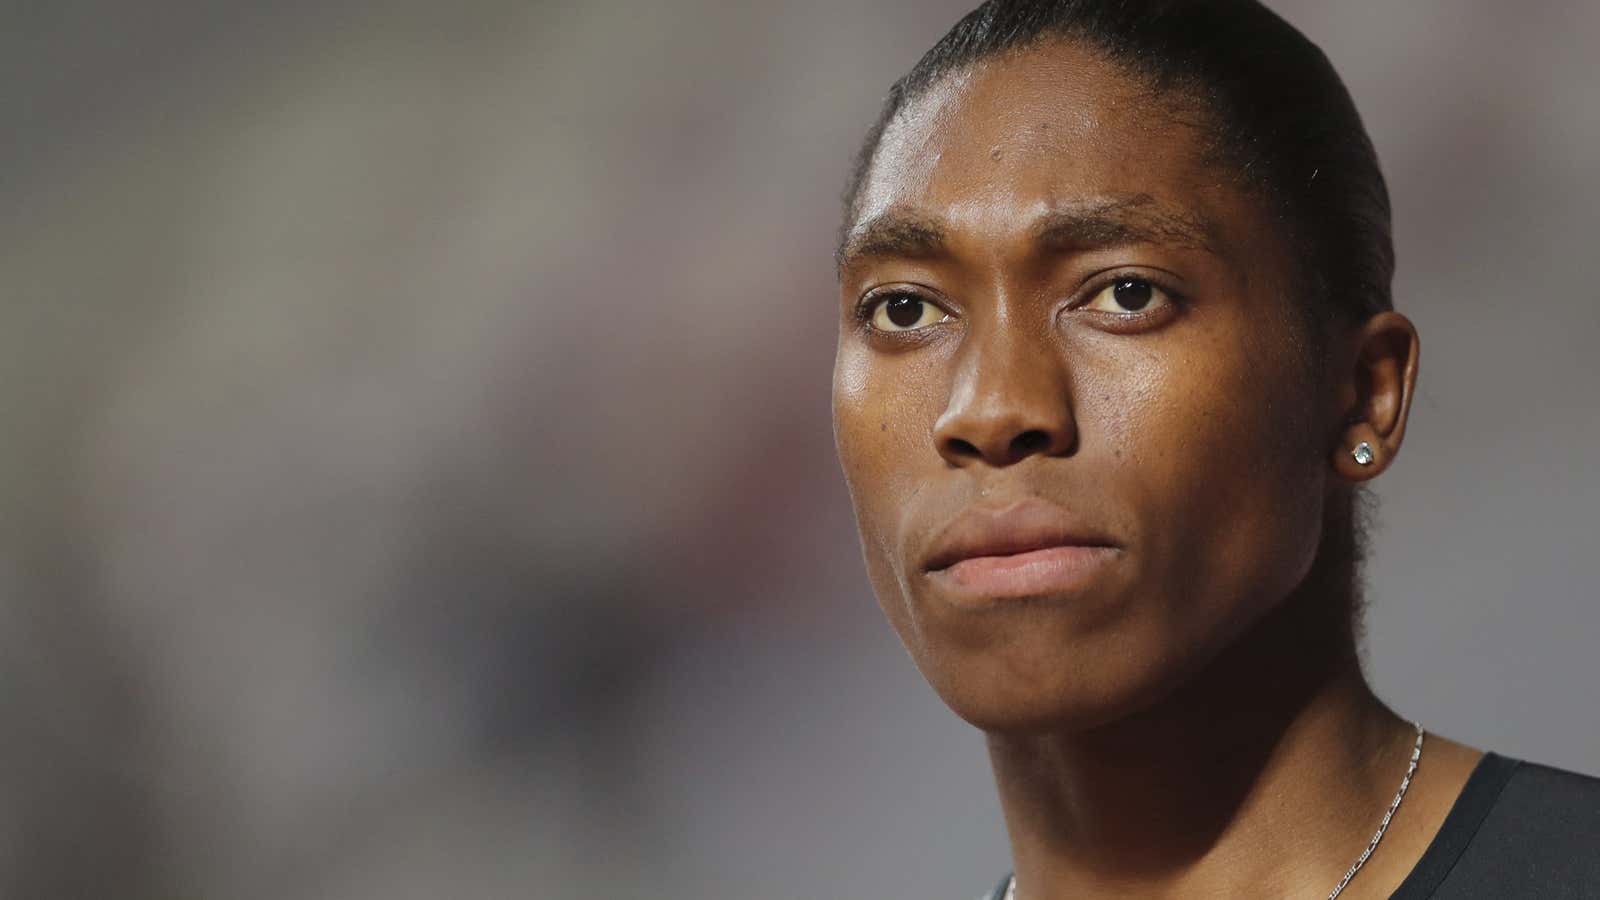 South Africa’s Caster Semenya competes in the women’s 800-meter final during the Diamond League in Doha, Qatar, Friday, May 3, 2019.